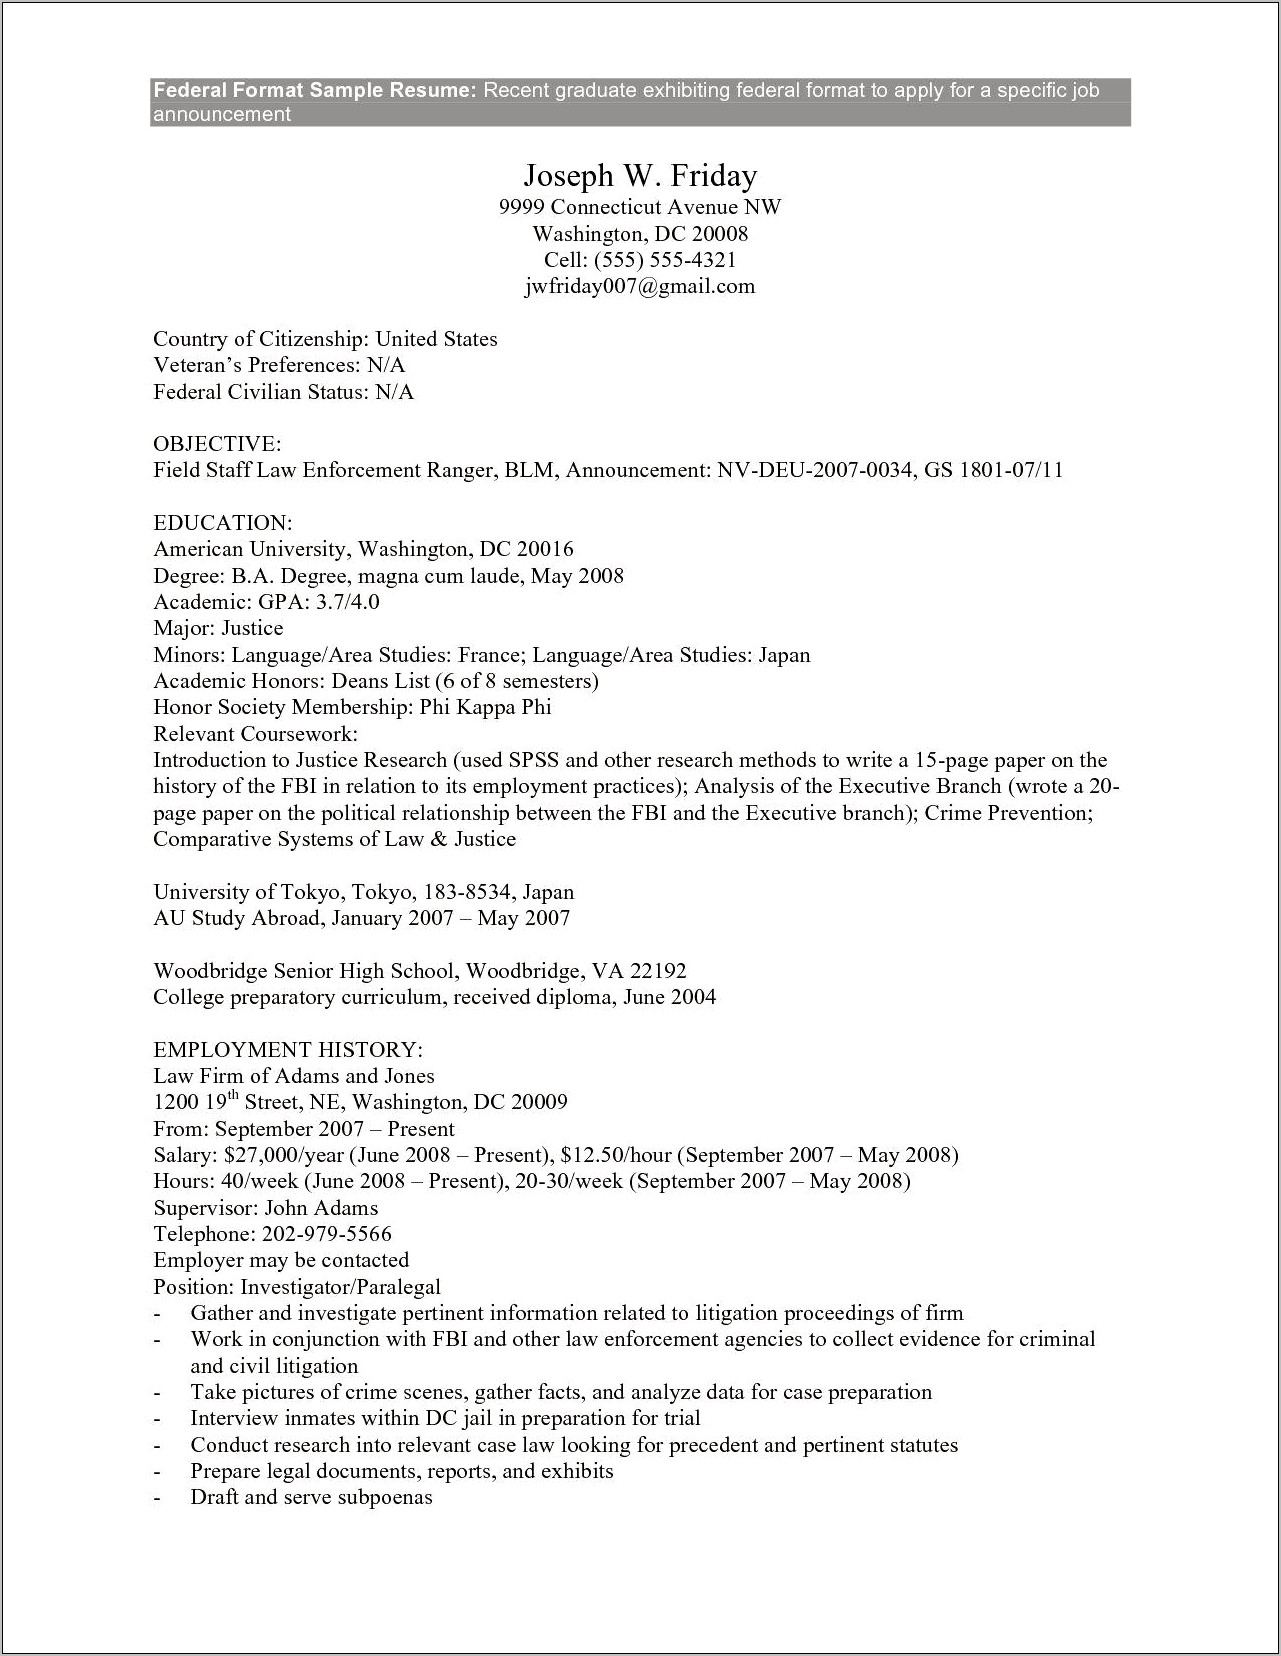 Federal Employee Resume Template For Civilians